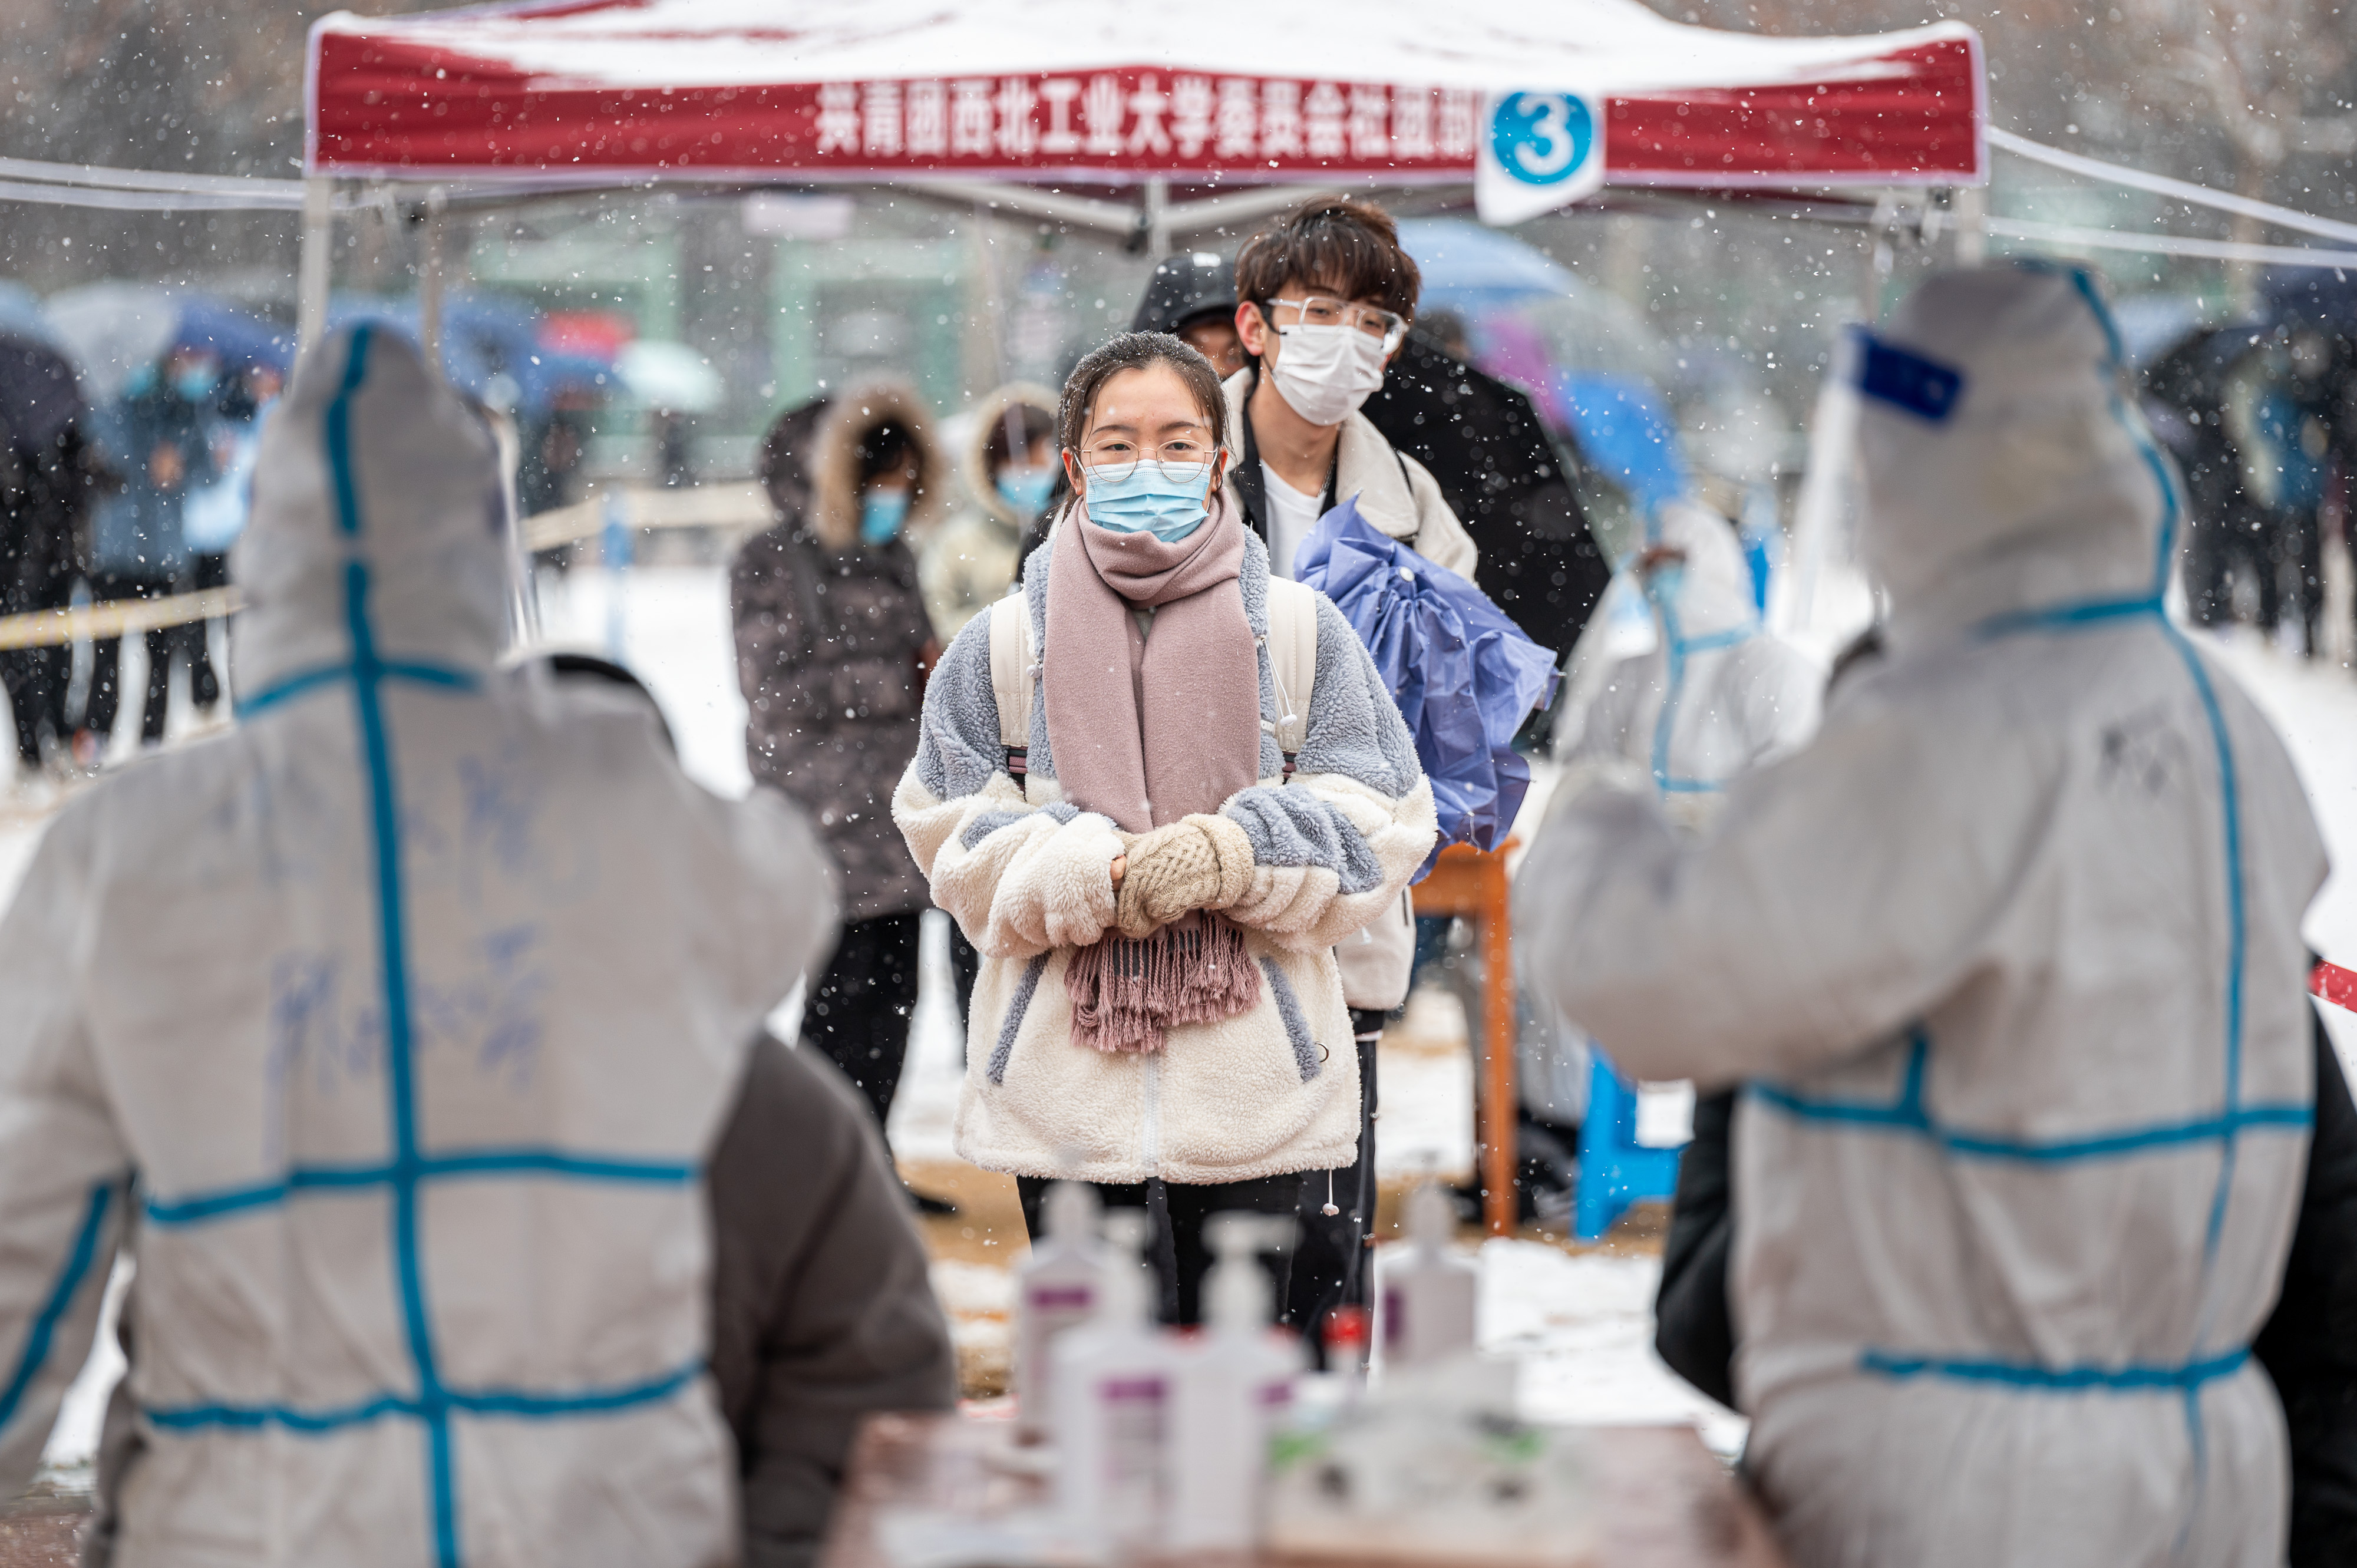 Students and teachers line up for a COVID-19 nucleic acid test at Northwestern Polytechnic University during a snowfall on December 25, 2021 in Xi'an, Shaanxi province, China. 